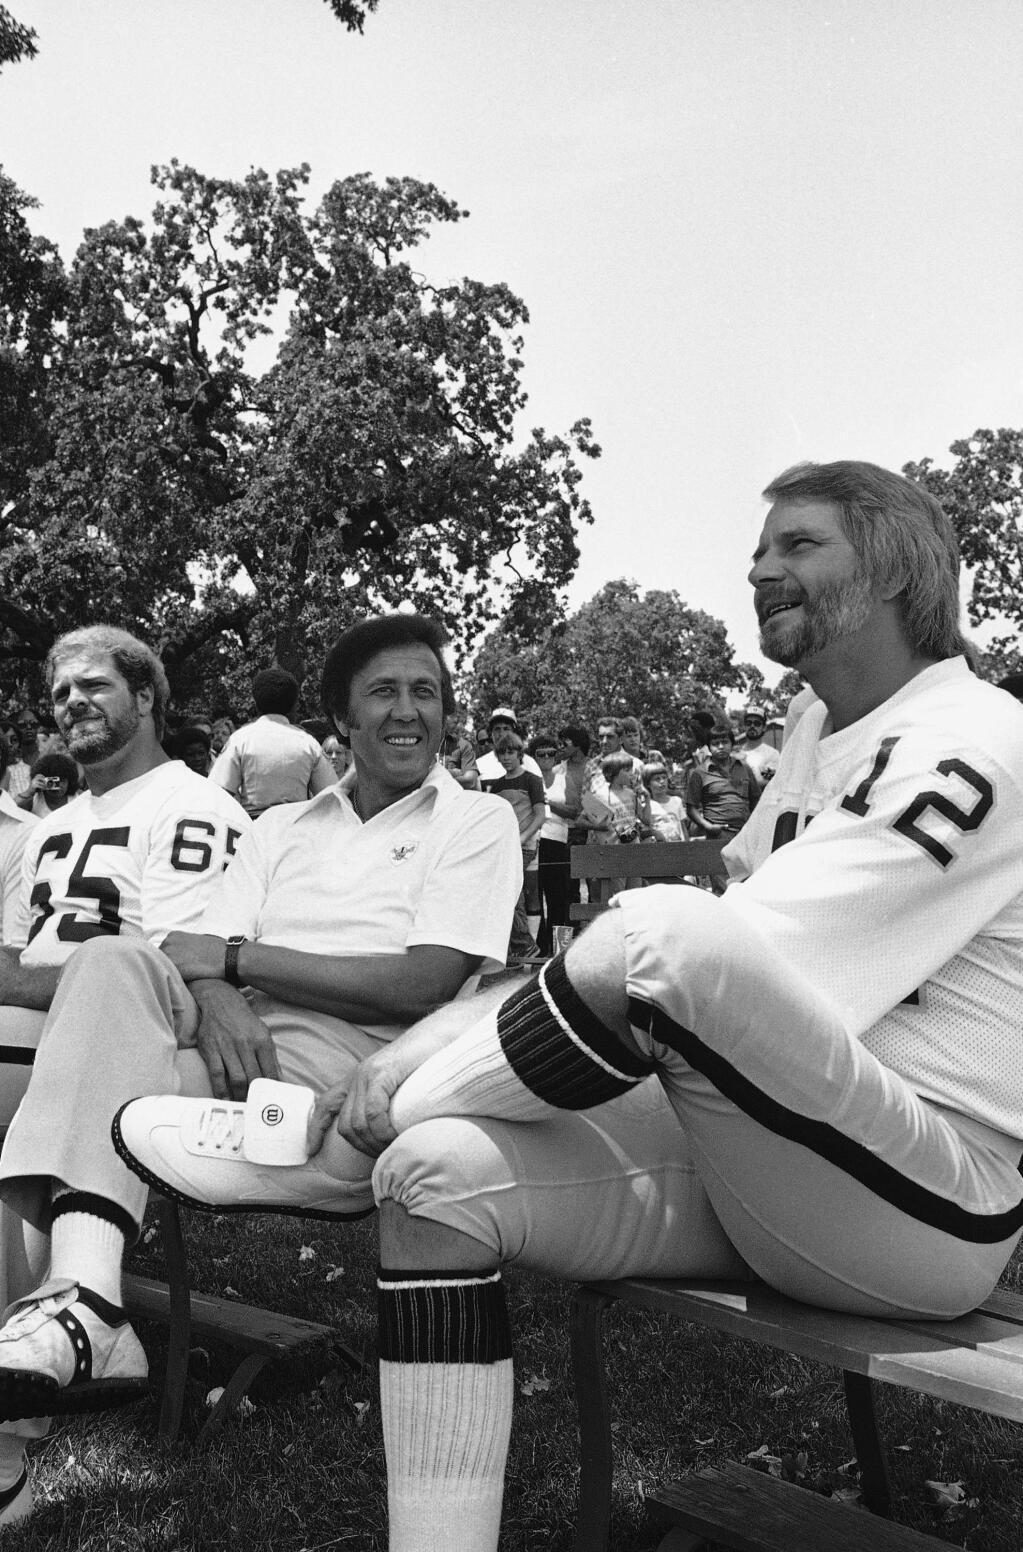 Oakland Raiders quarterback Ken Stabler chats with head coach Tom Flores during Stablers second day of training camp in Santa Rosa, California Saturday, July 22, 1979. All 98 of the players were introduced for the first time to a crowd of about 5,000 during Family Day. The veteran quarterback said he still wants to be traded to another team. (AP Photo/Rich Pedroncelli)